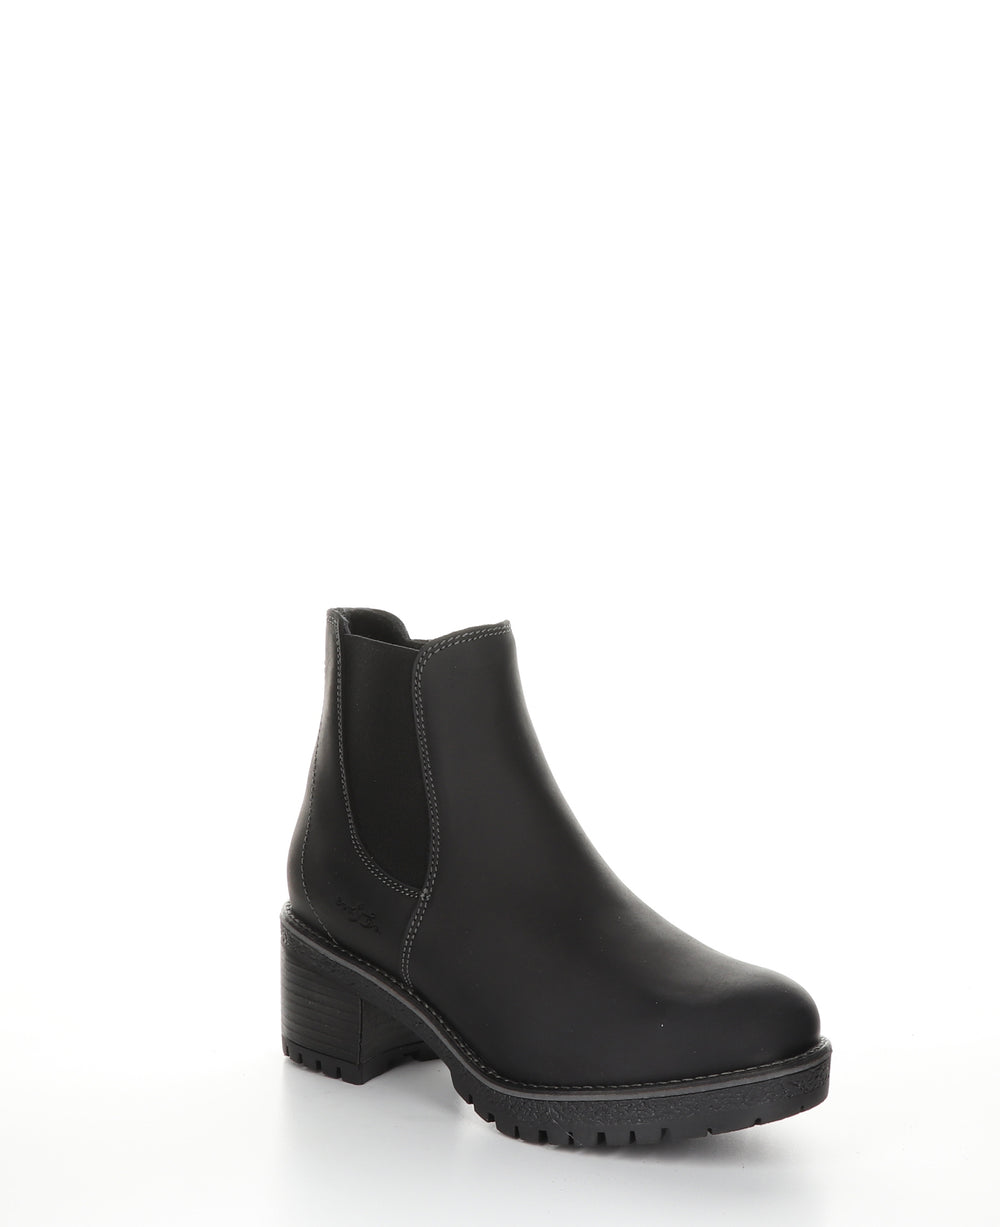 MASS Black Zip Up Ankle Boots